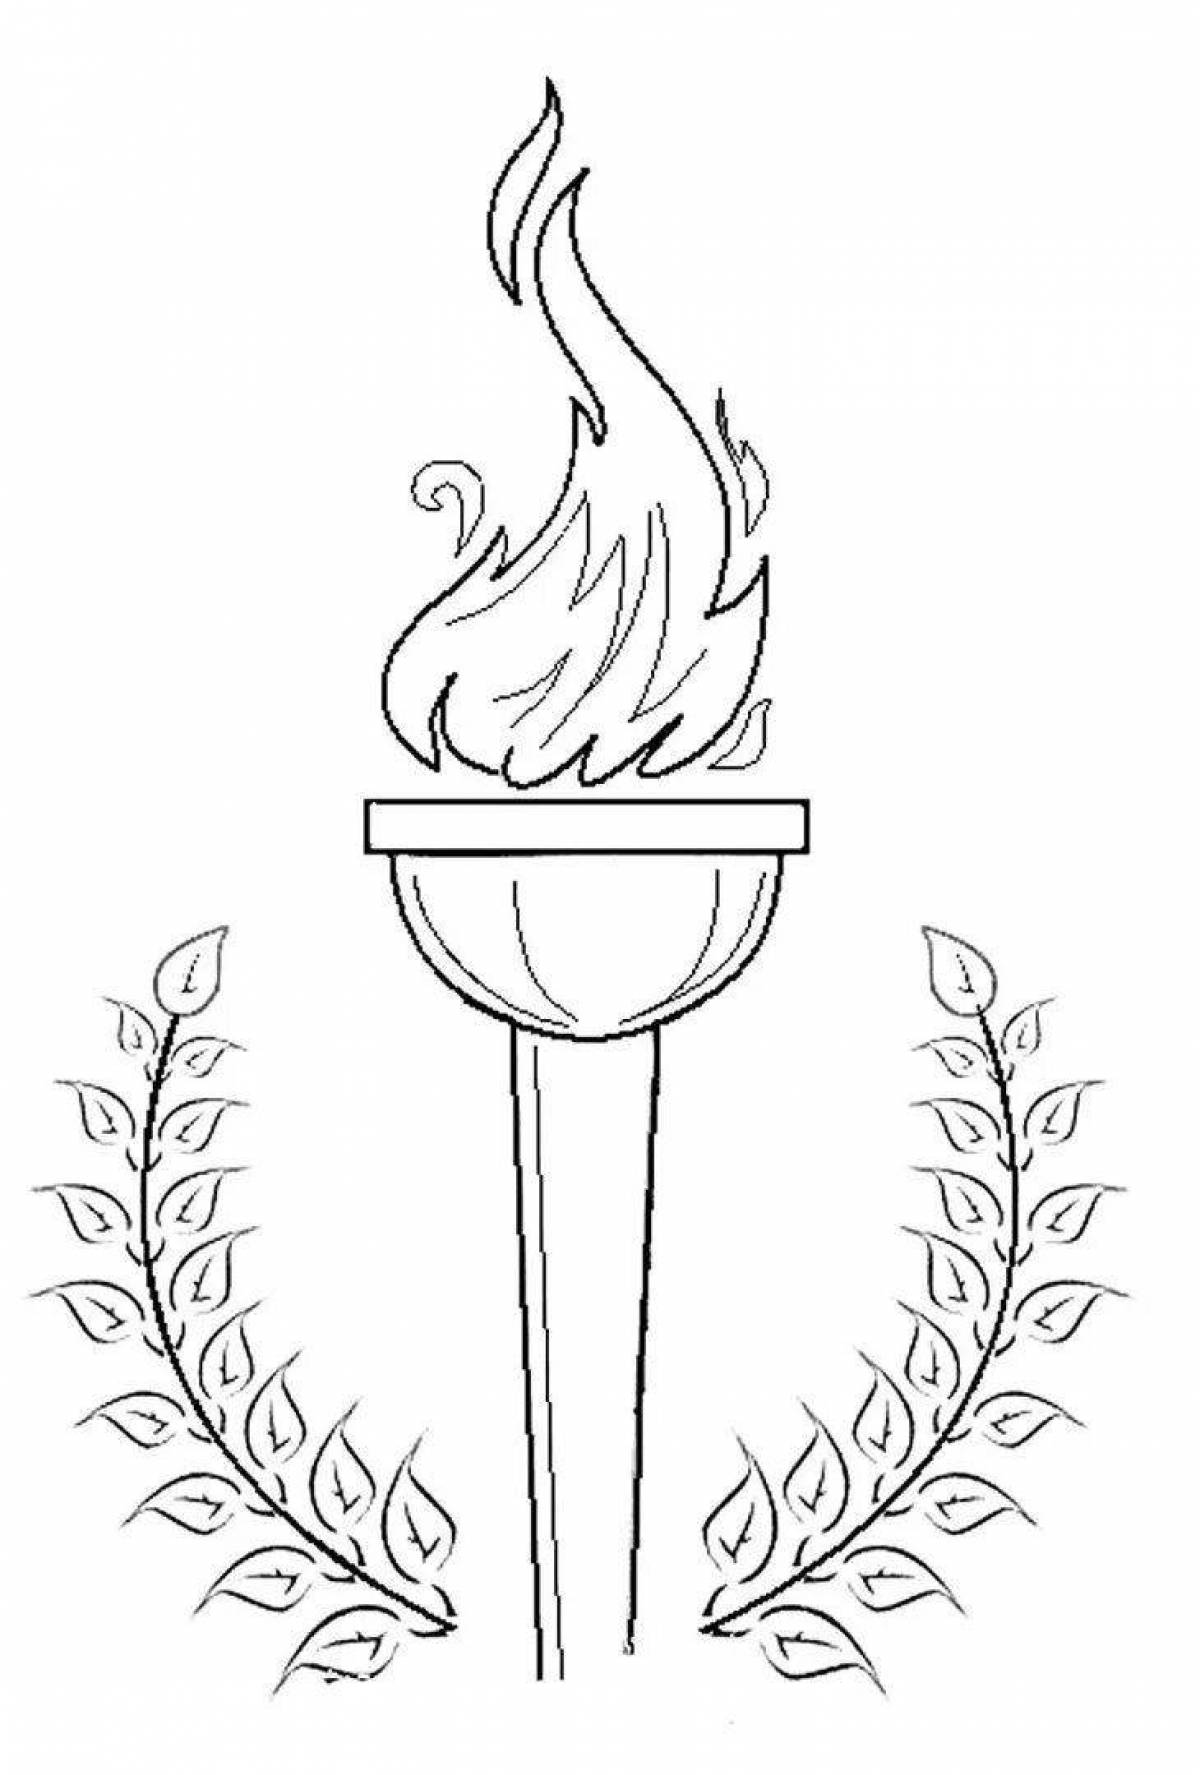 Playful torch coloring page